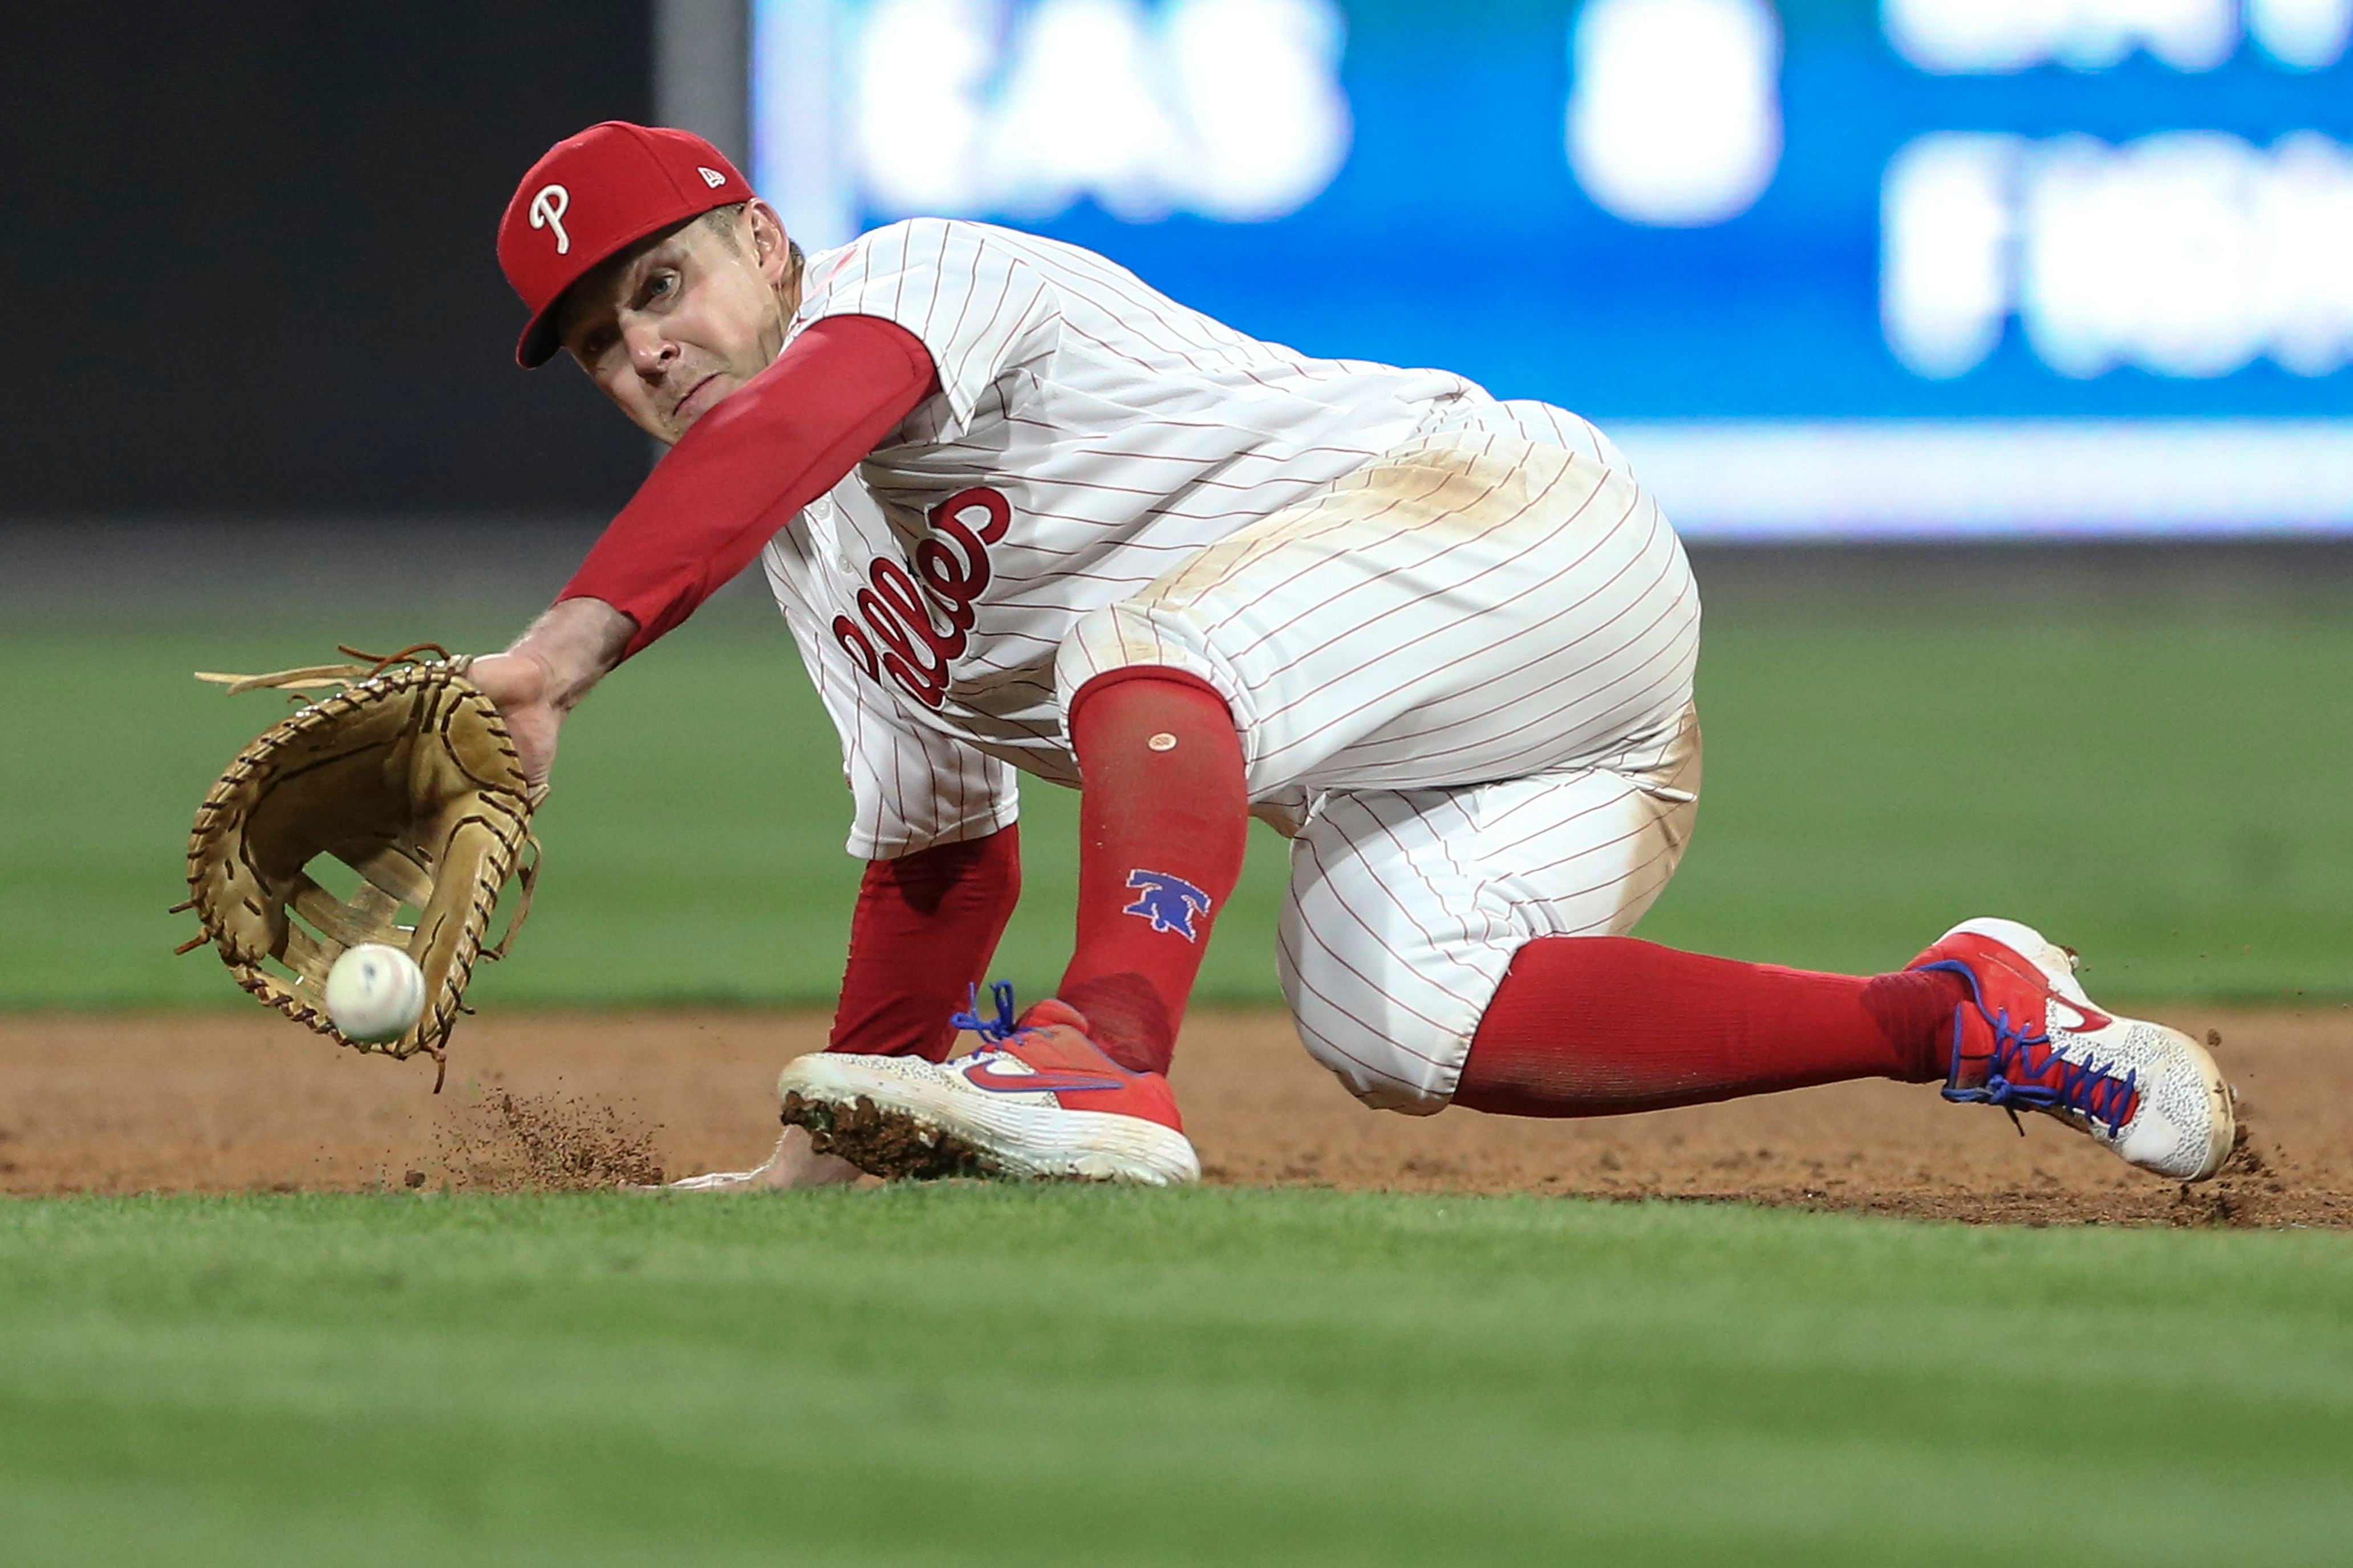 Hoskins' big error leads to Phillies' 6-5 loss to Marlins